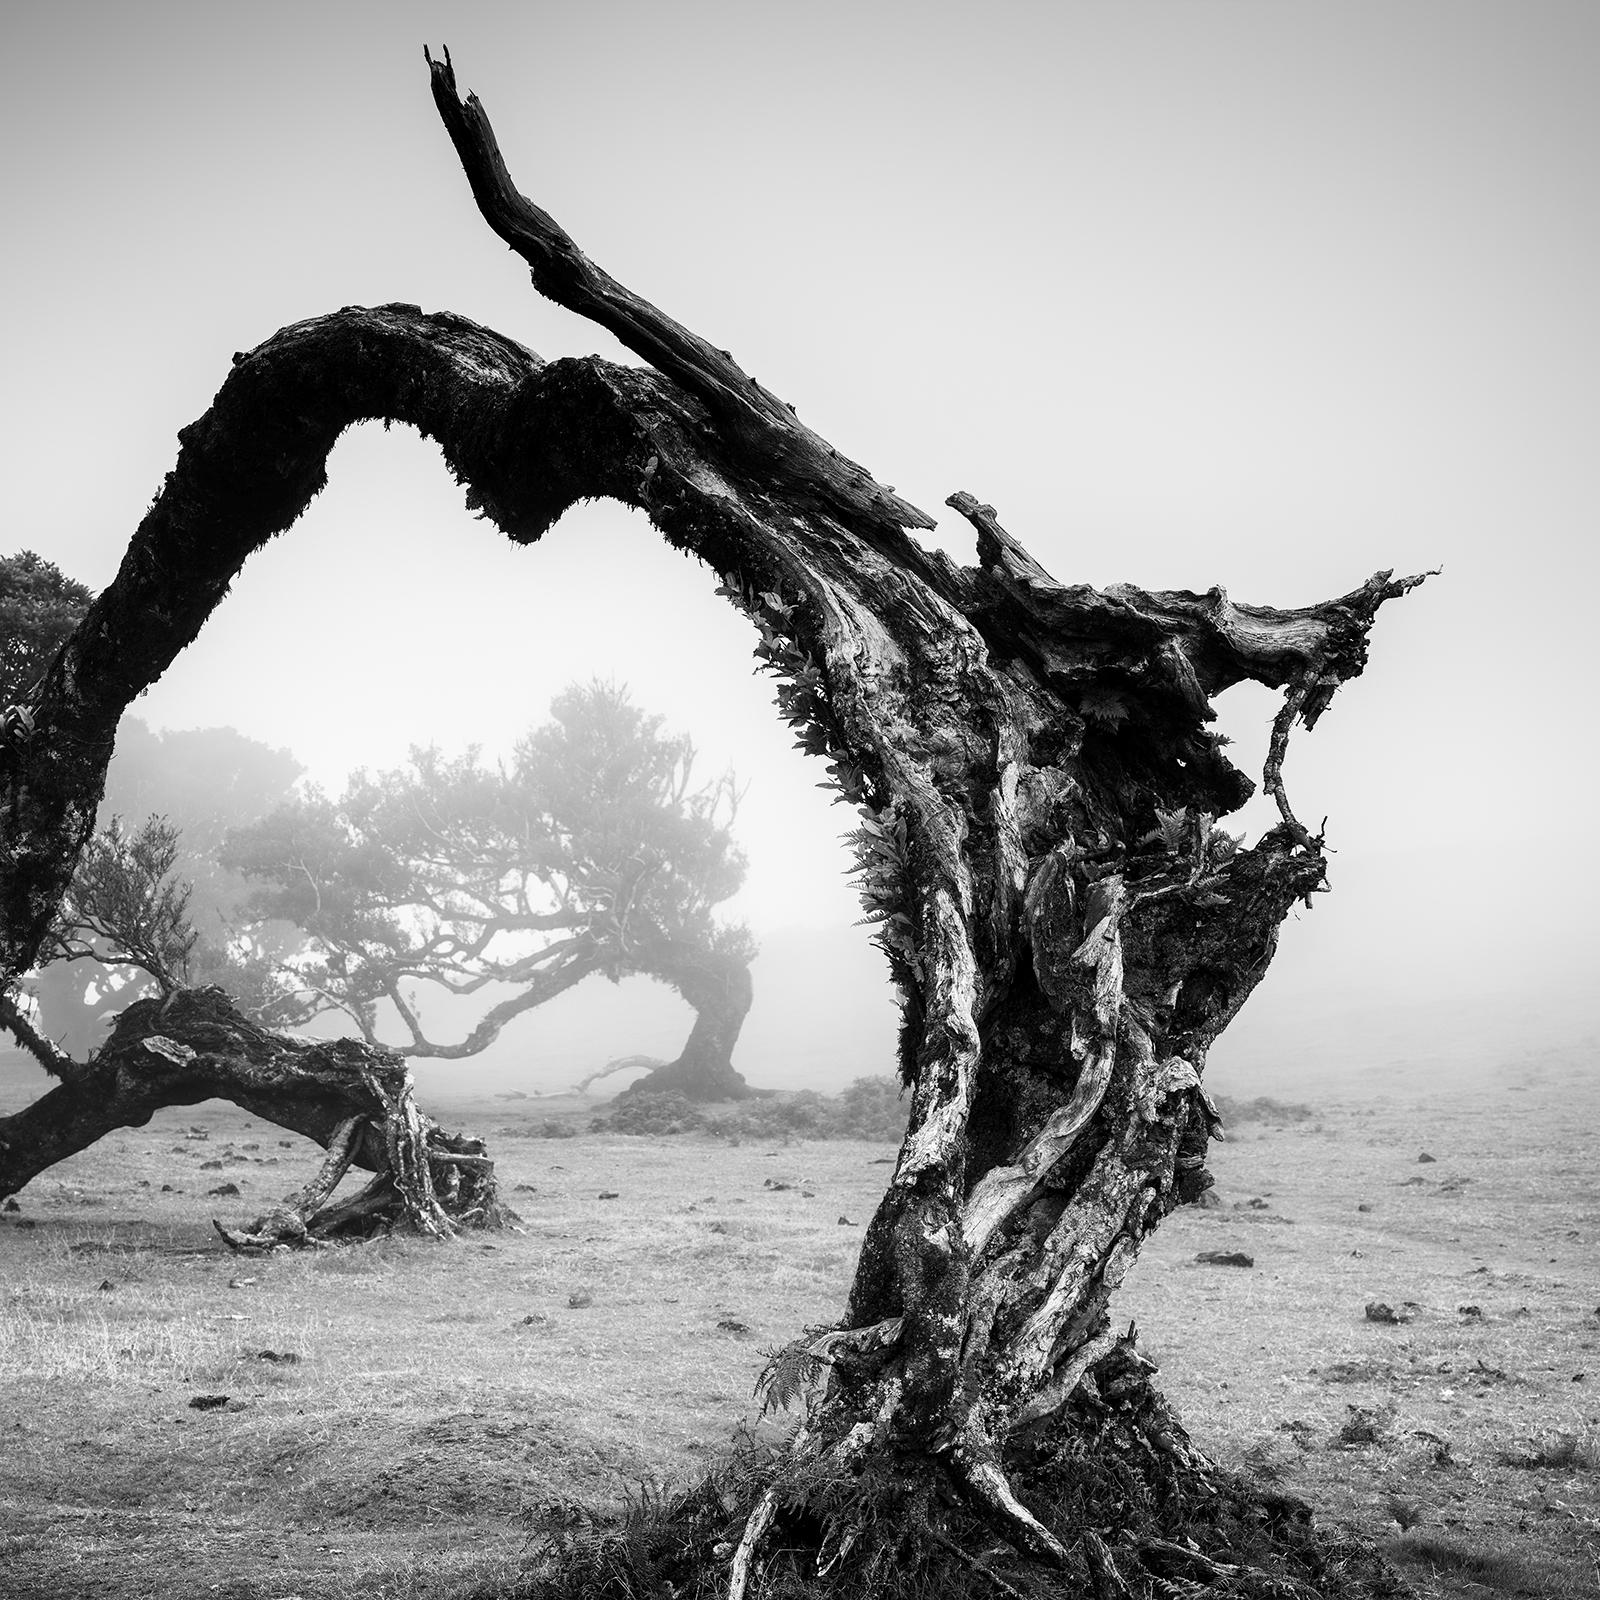 Black and white fine art landscape photography. Curved tree in fairy forest in mystical fog, Fanal, Portugal. Archival pigment ink print, edition of 8. Signed, titled, dated and numbered by artist. Certificate of authenticity included. Printed with